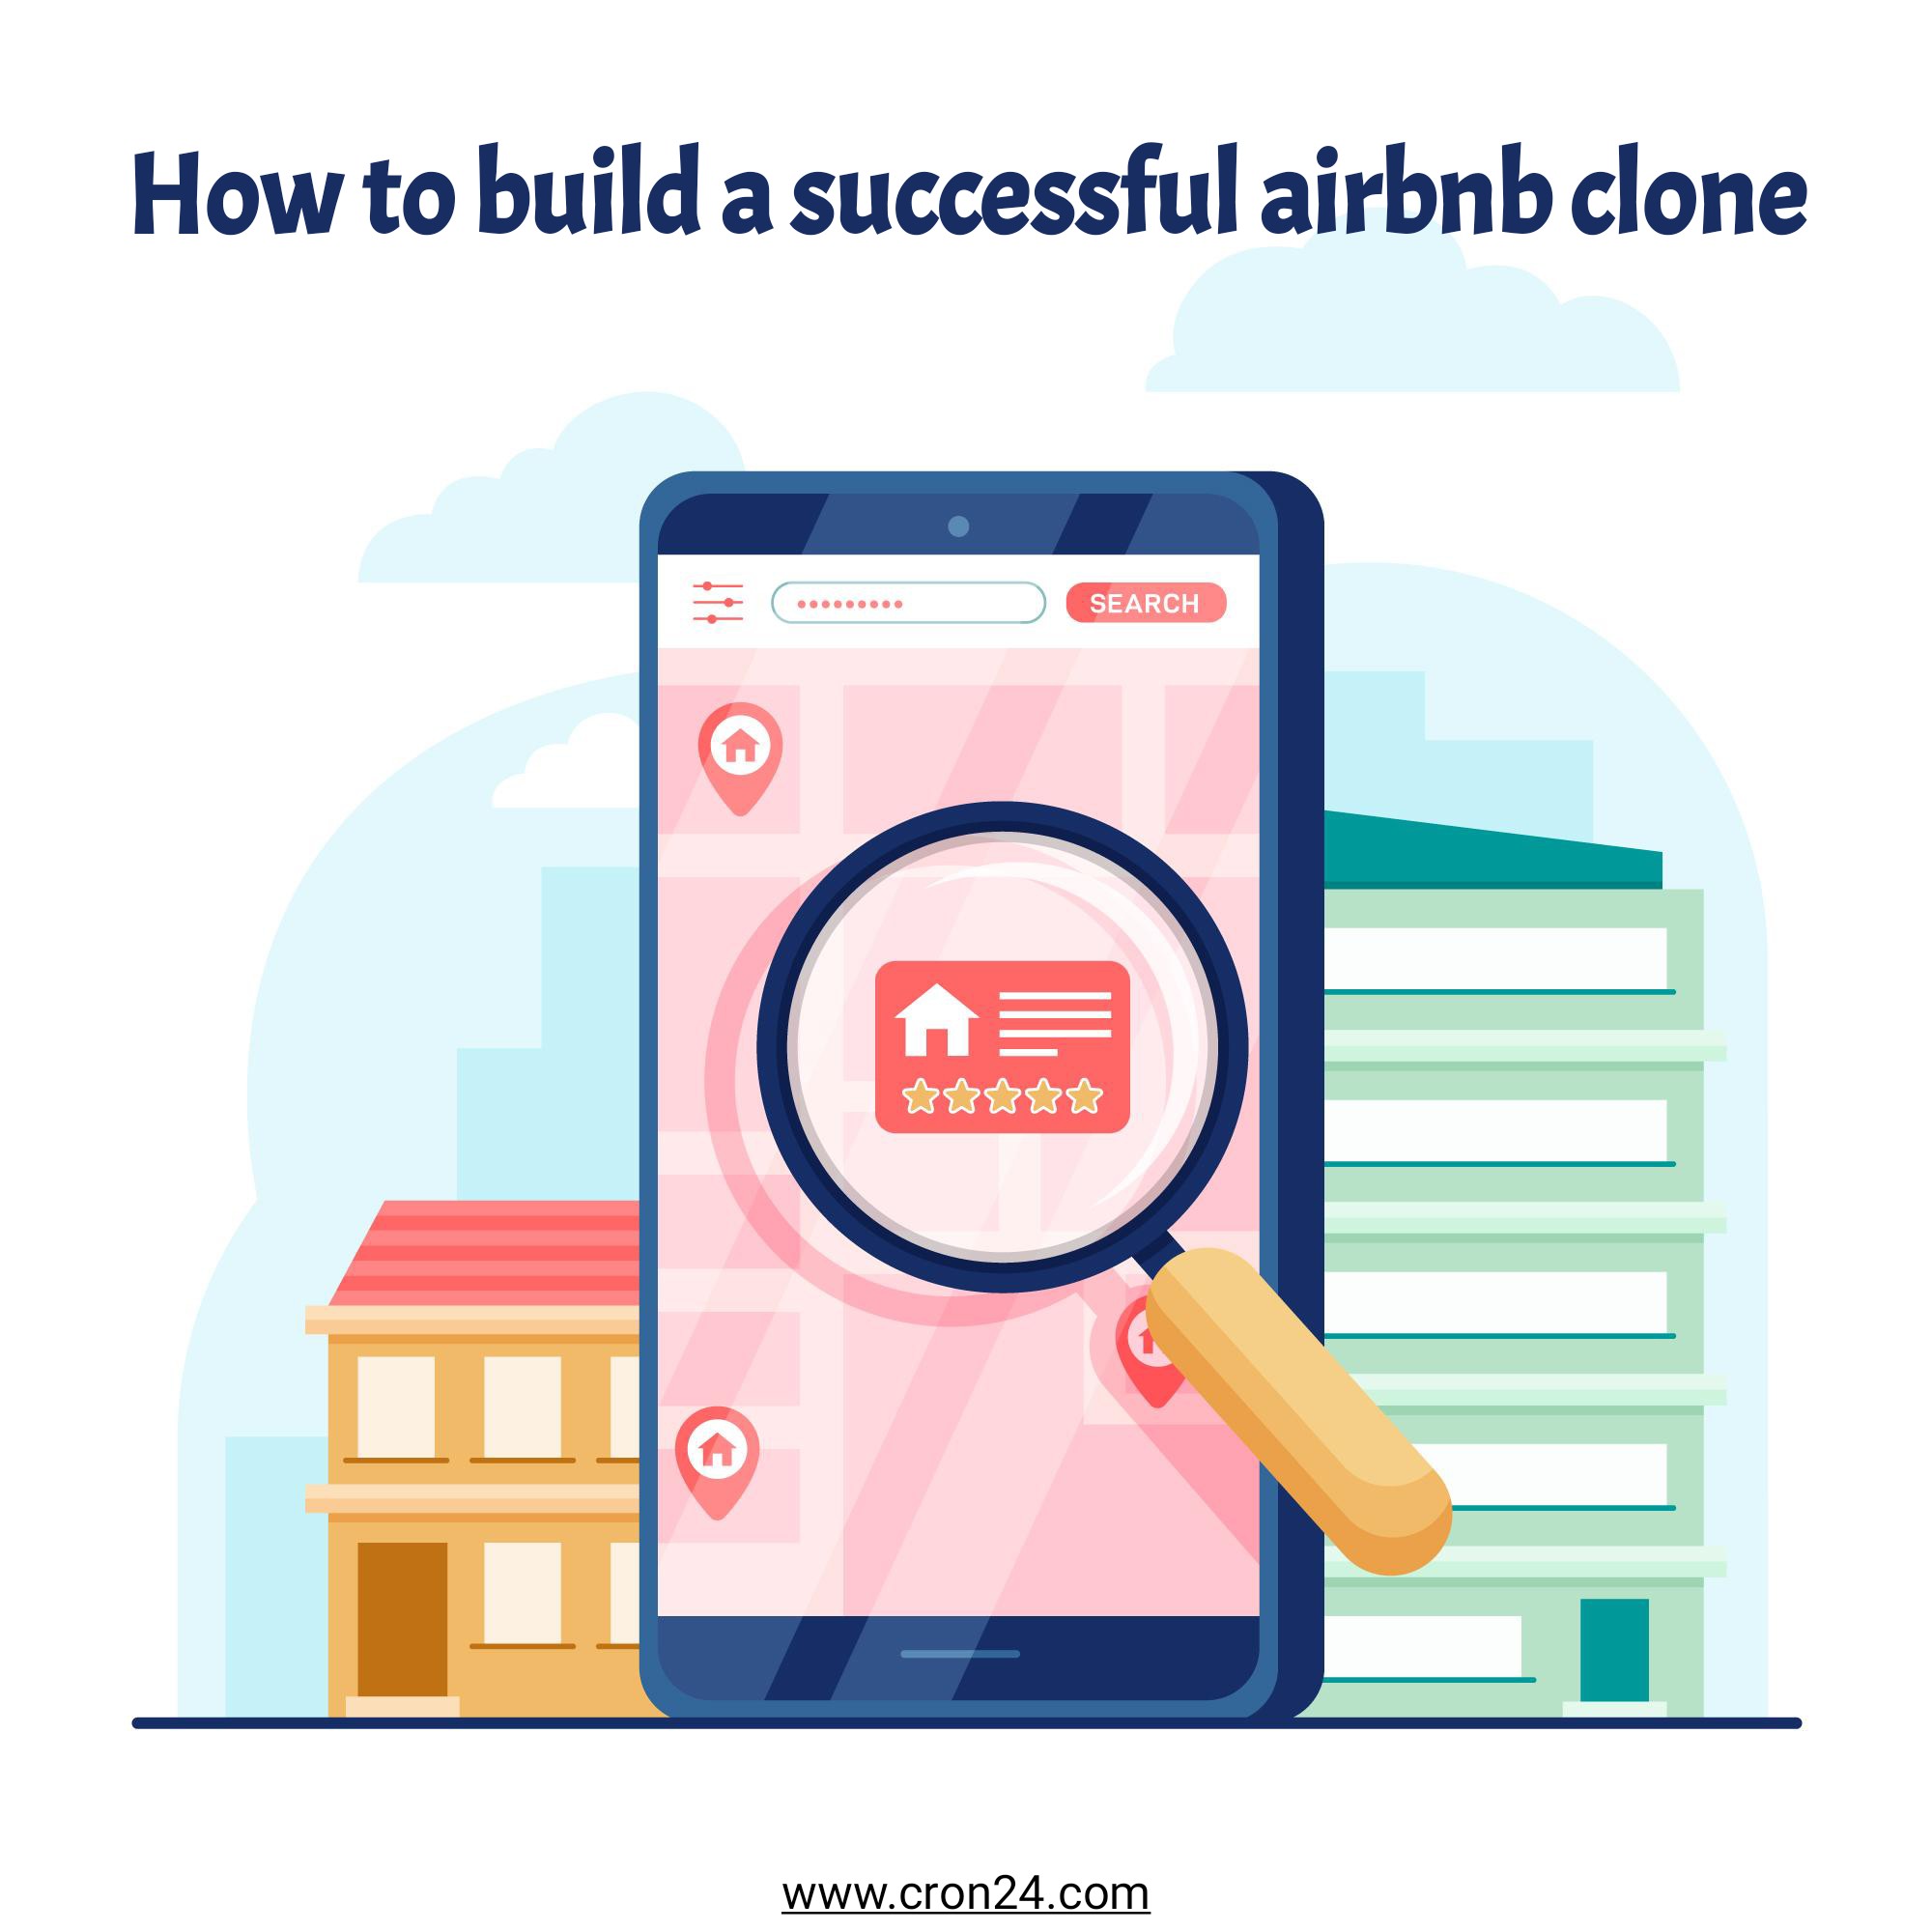 How To Build a Successful Airbnb Clone – A Ultimate Guide